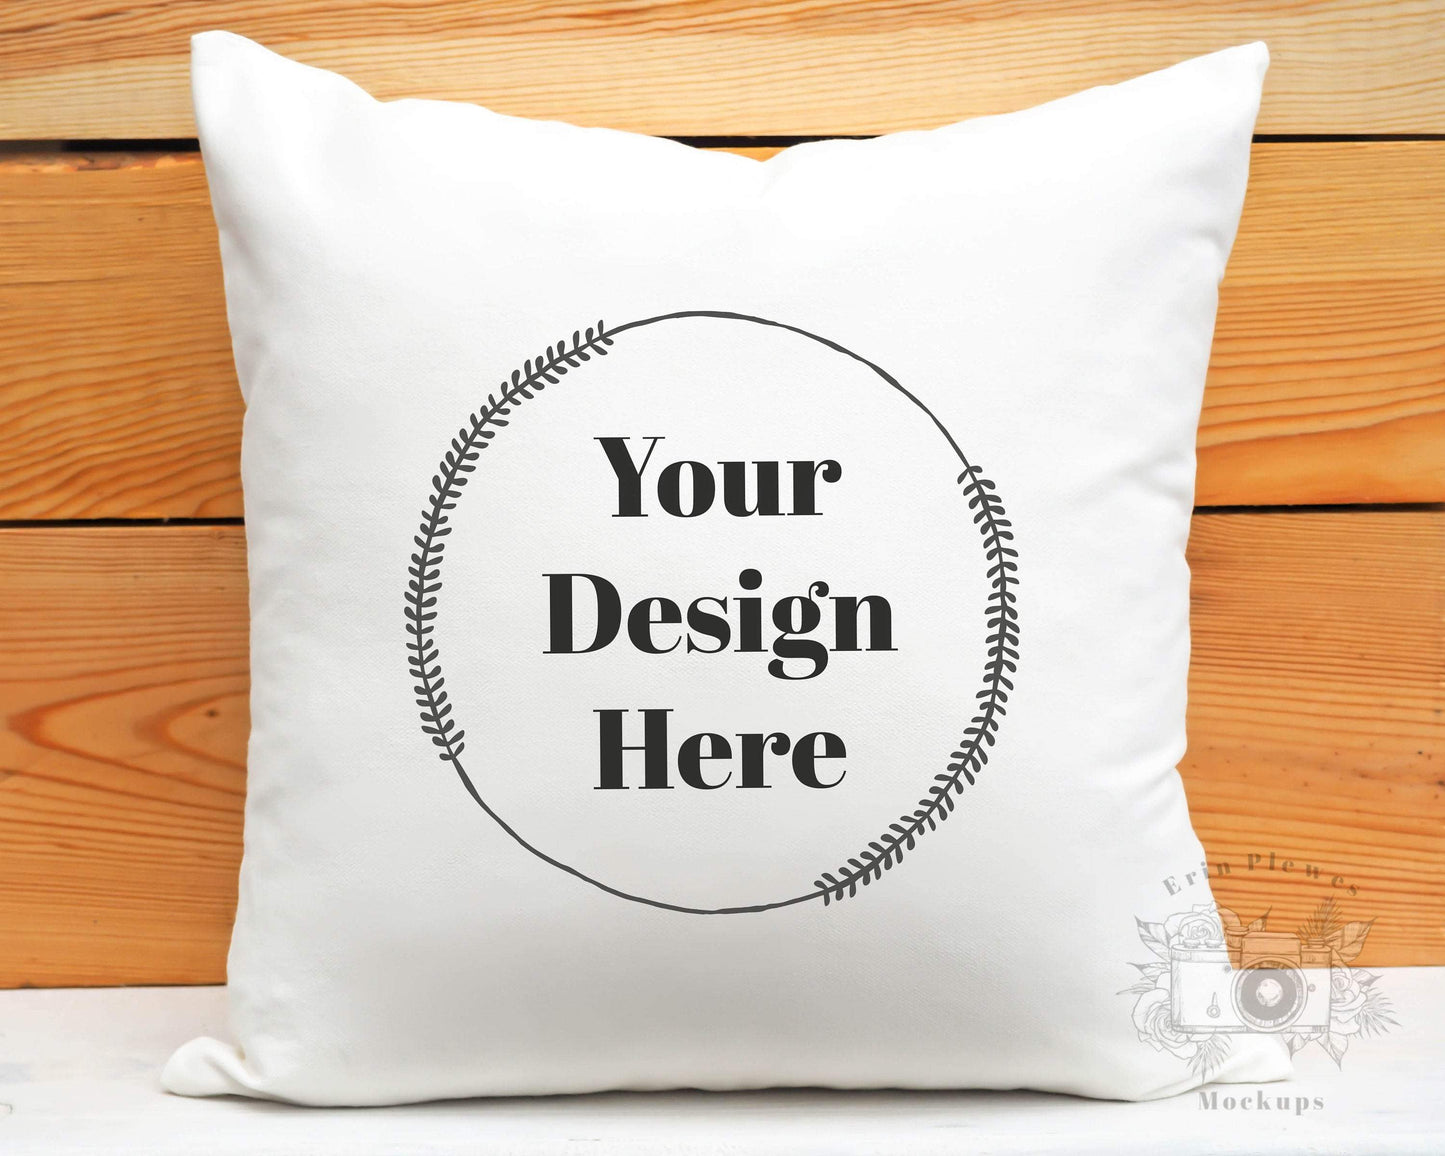 Erin Plewes Mockups Pillow Mockup, White pillow mockup with rustic wood background for lifestyle stock photography, square pillow mock up jpeg digital download